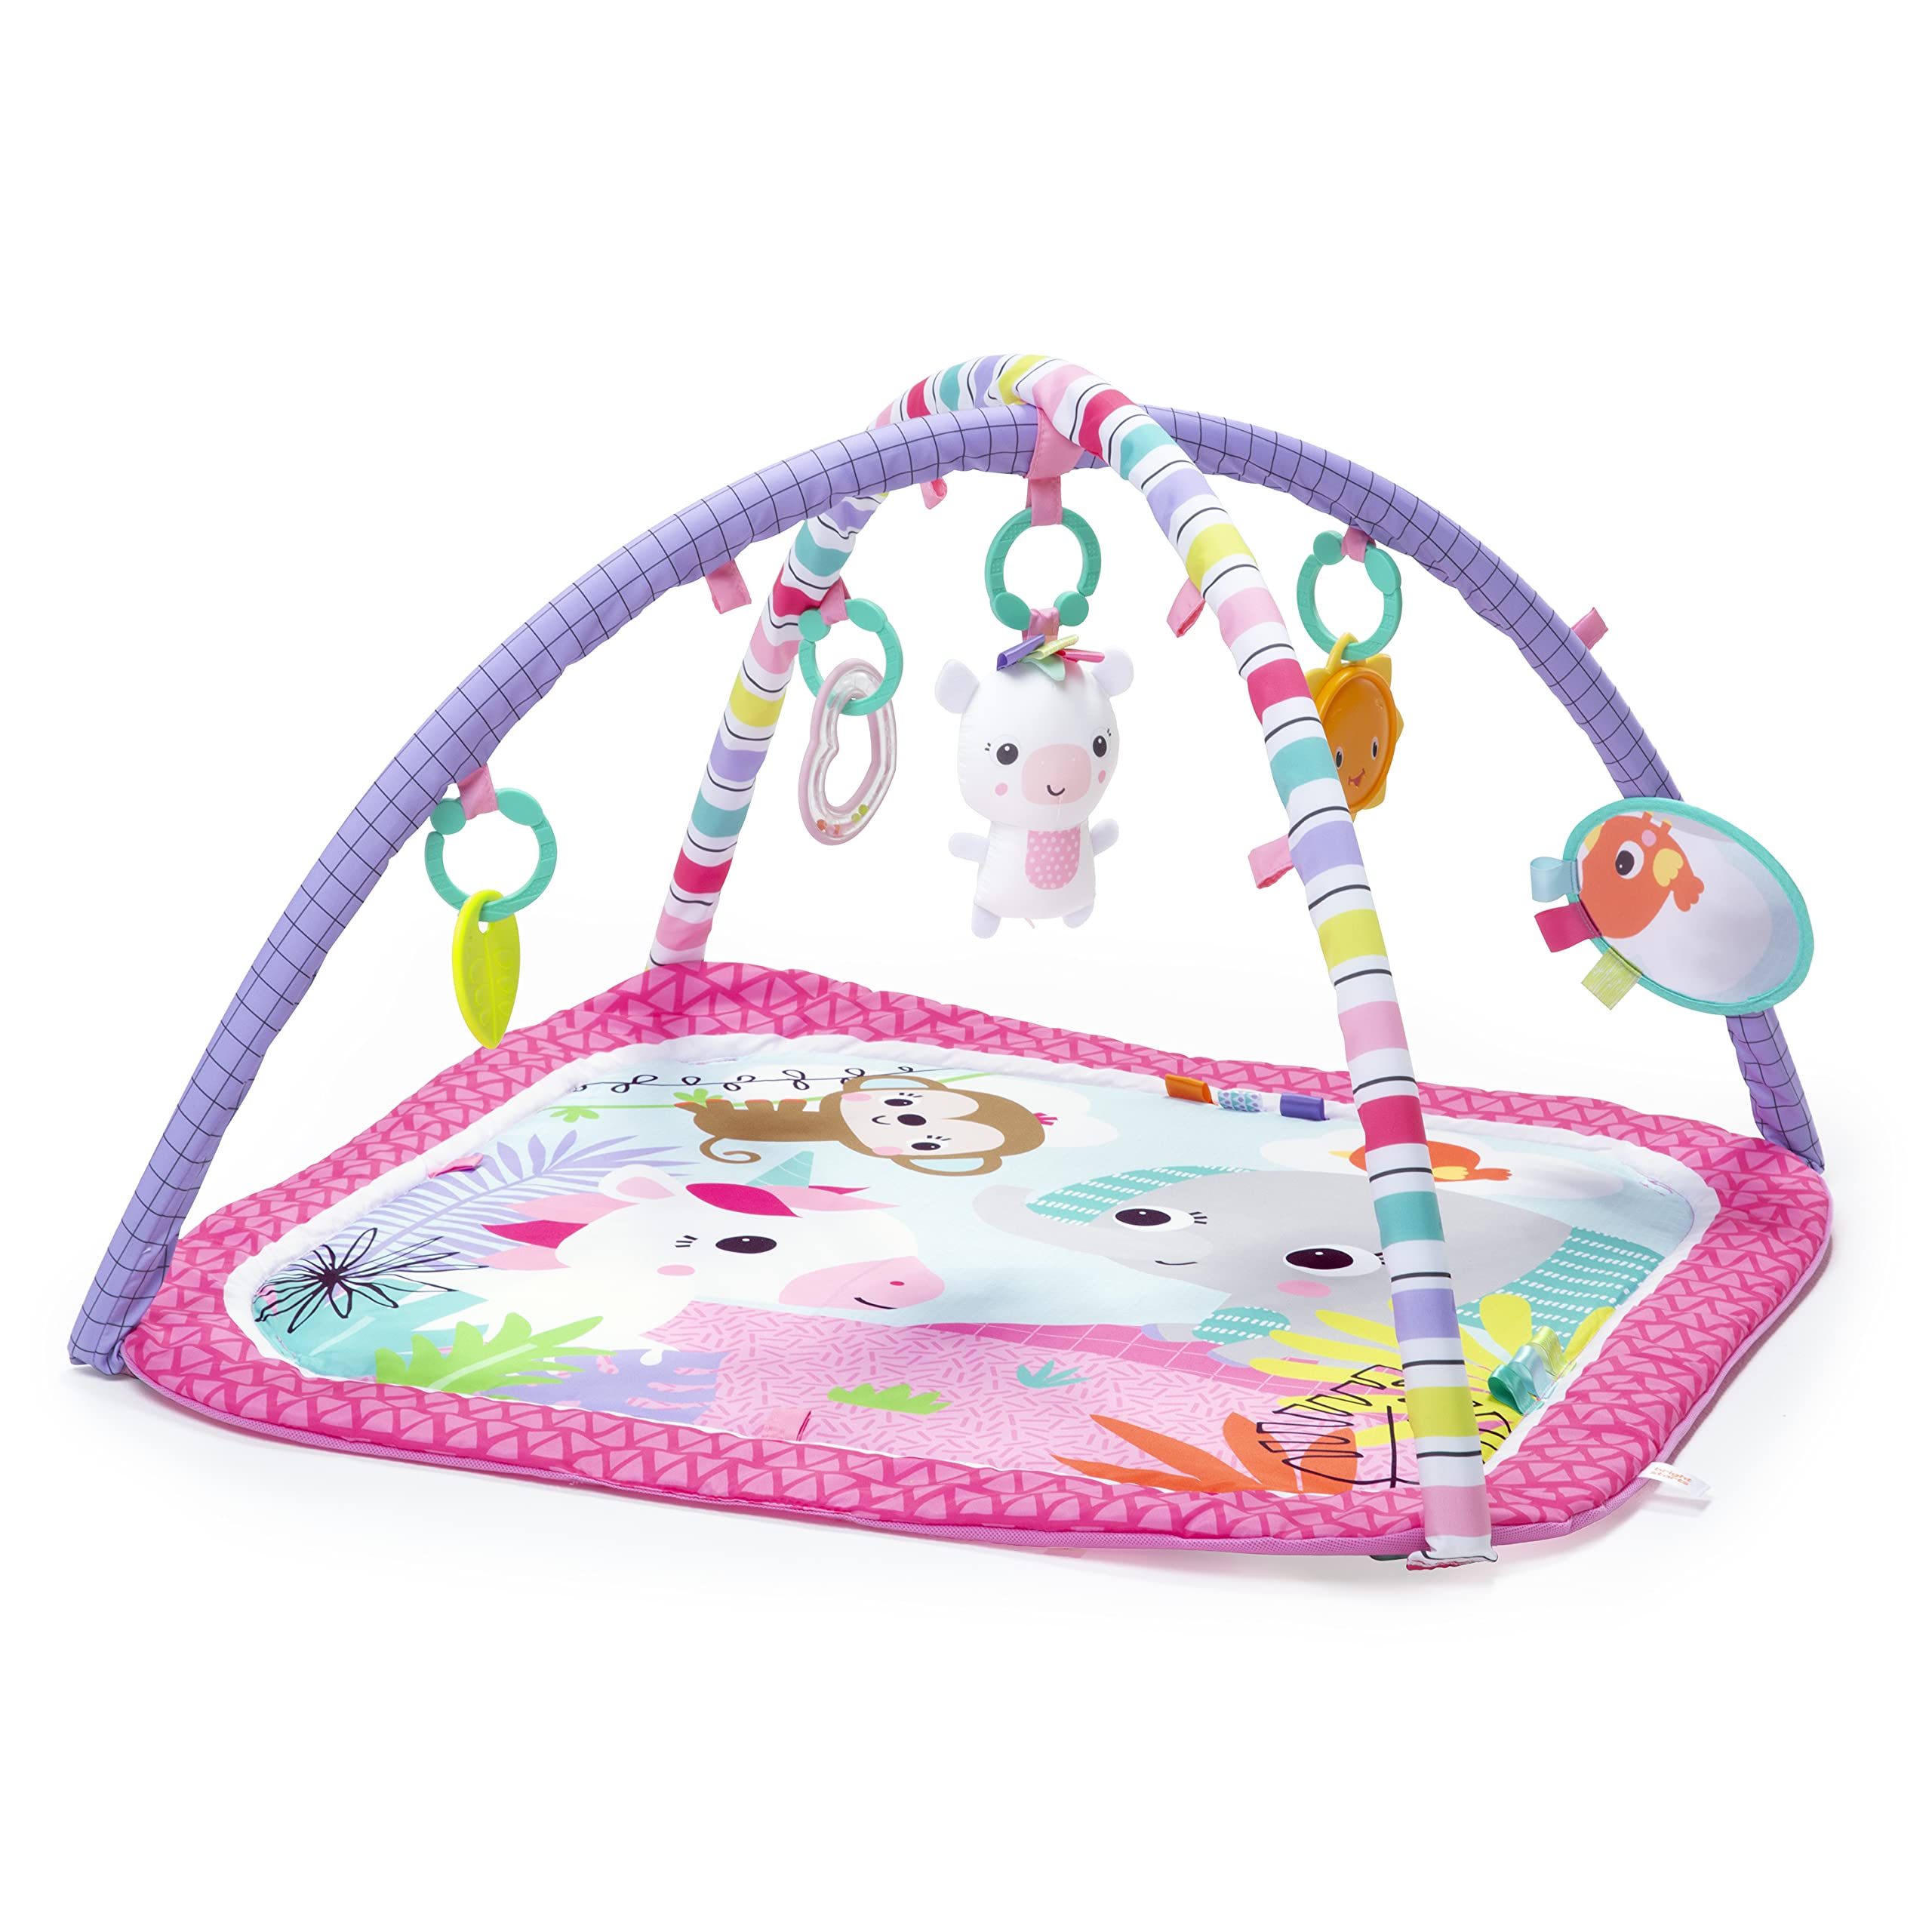 Bright Starts Unicorn Crew Baby Activity Gym & Play Mat with Taggies, Newborn and up - Pink, 30x30x18 Inch